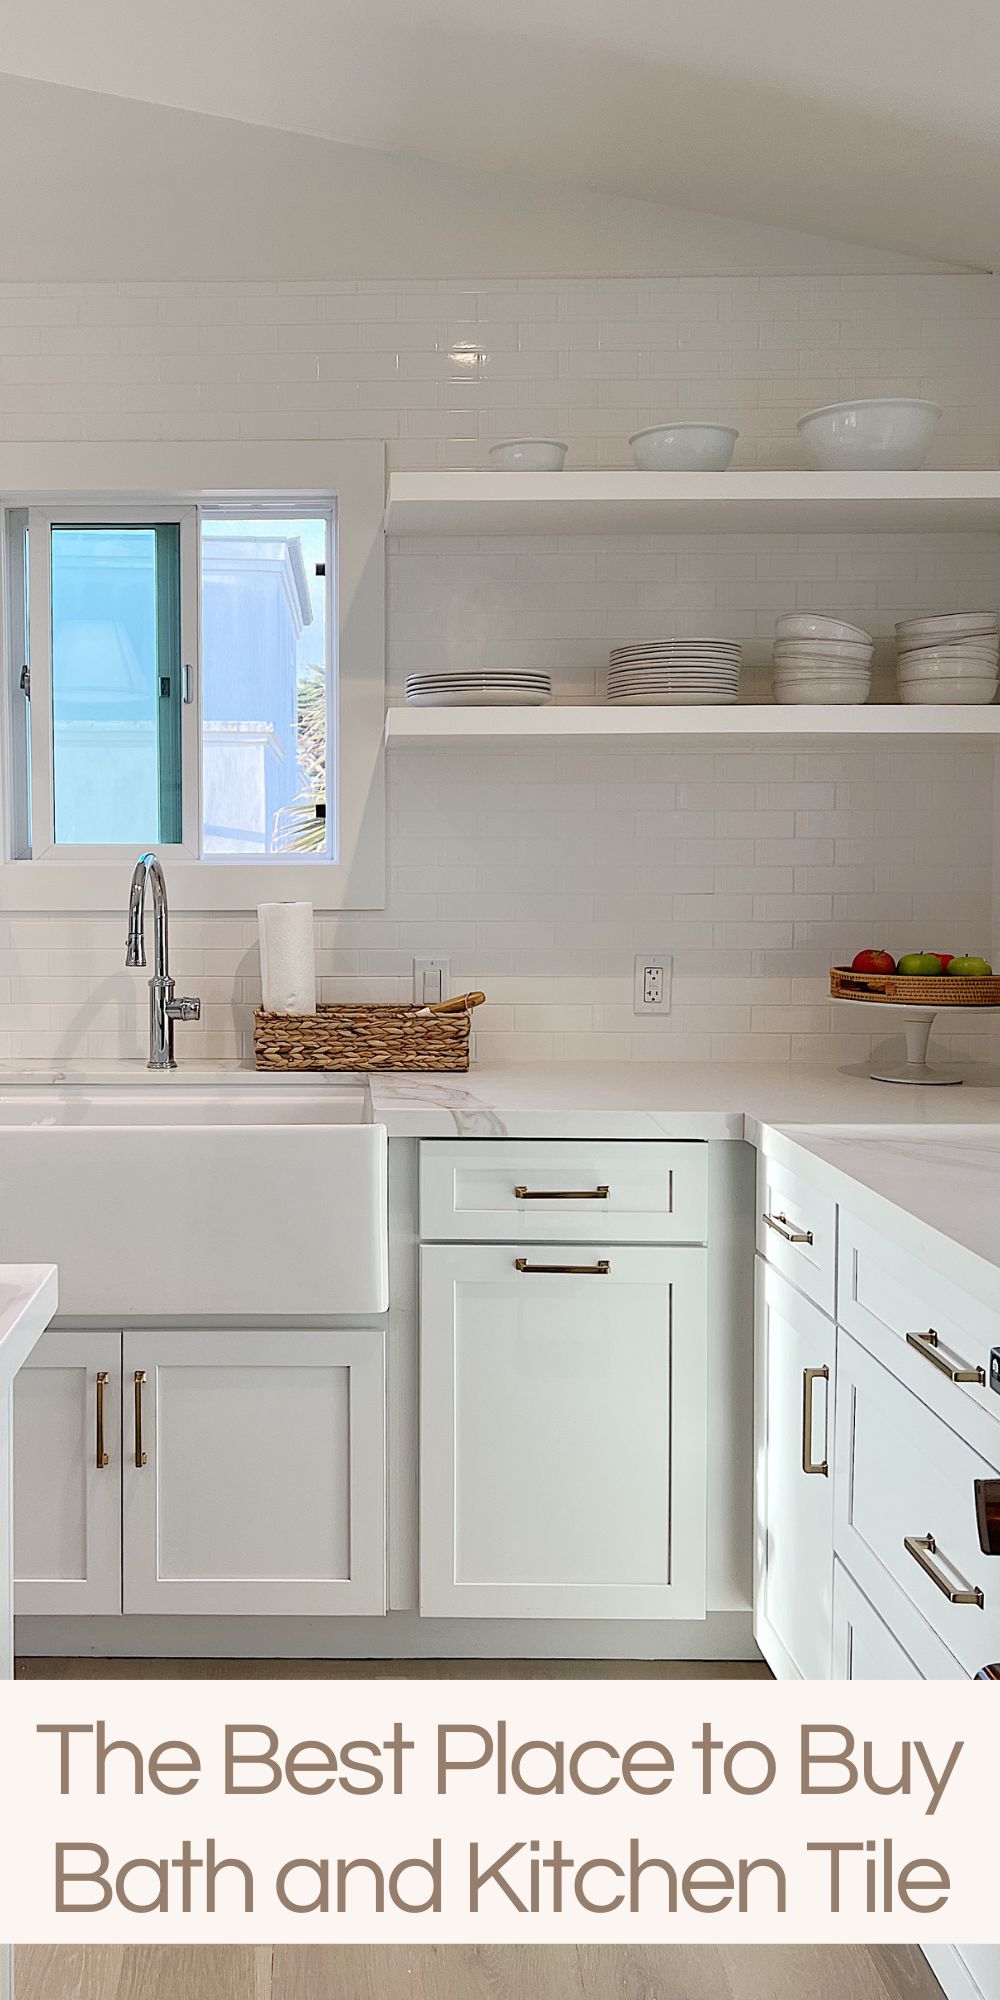 The tile in our beach house is simply amazing and today I am sharing my resource for the absolute best place to source bath and kitchen tile.